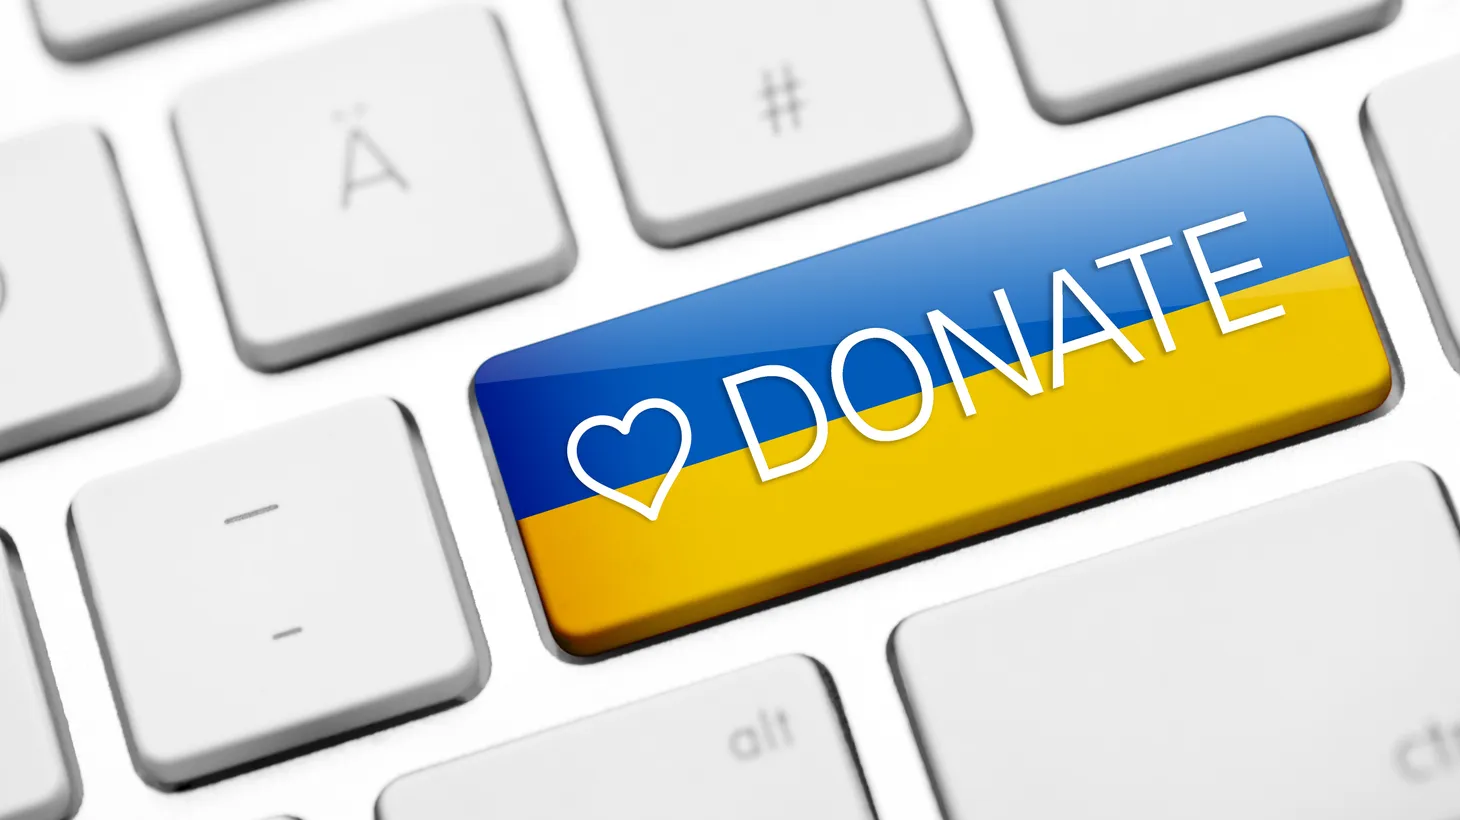 A keyboard key is colored with a Ukraine flag and “donate” text.